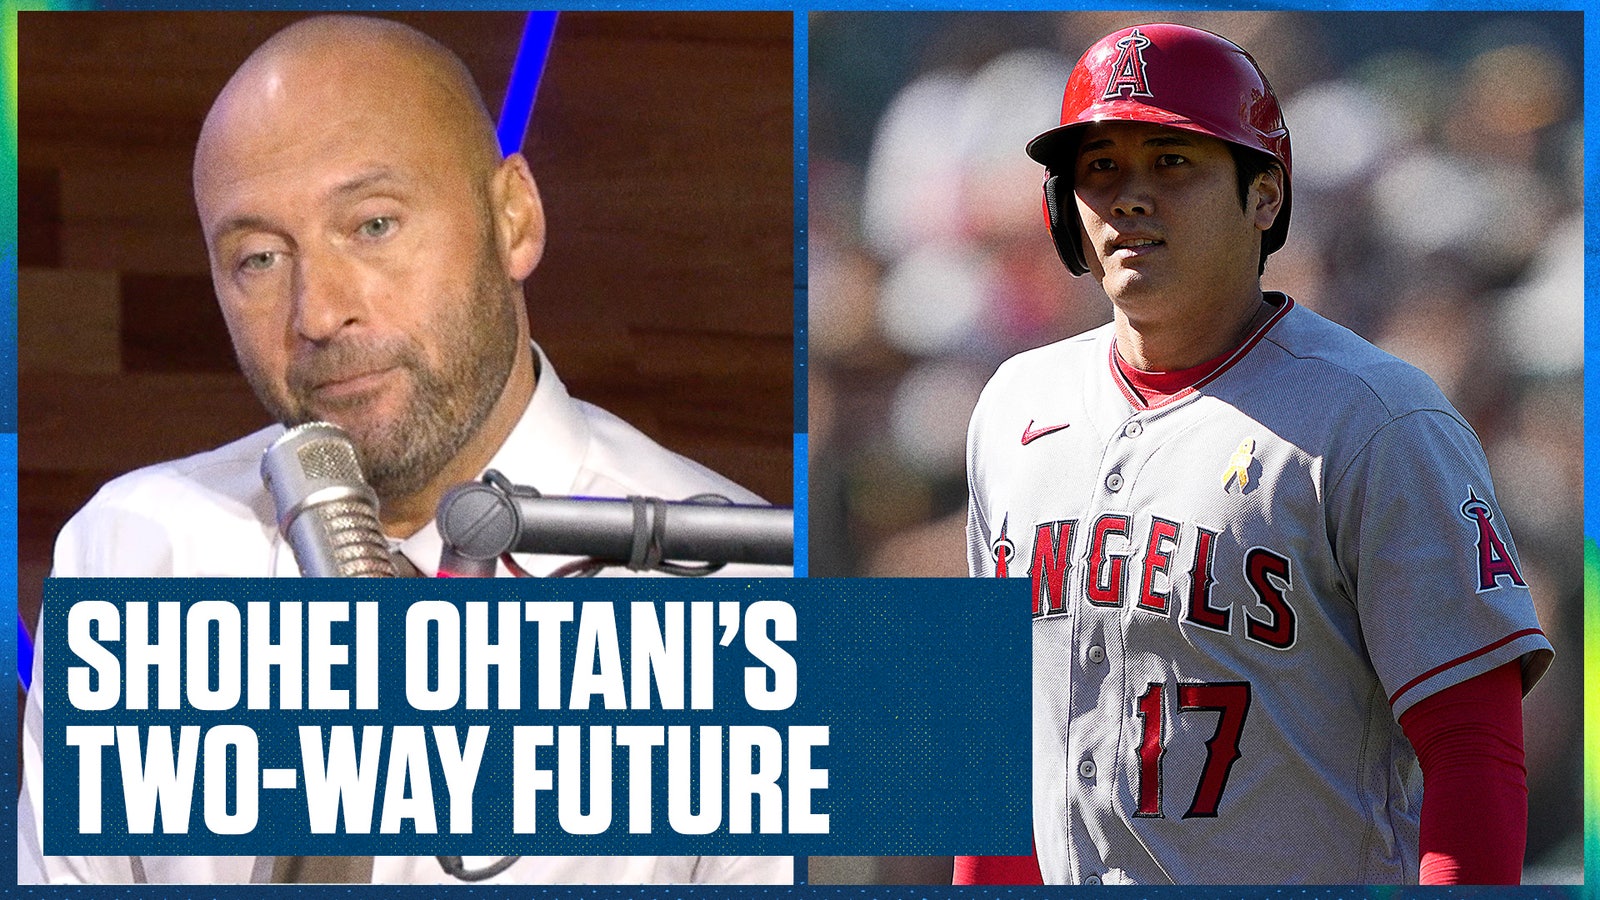 Jeter on the greatness of Shohei Ohtani